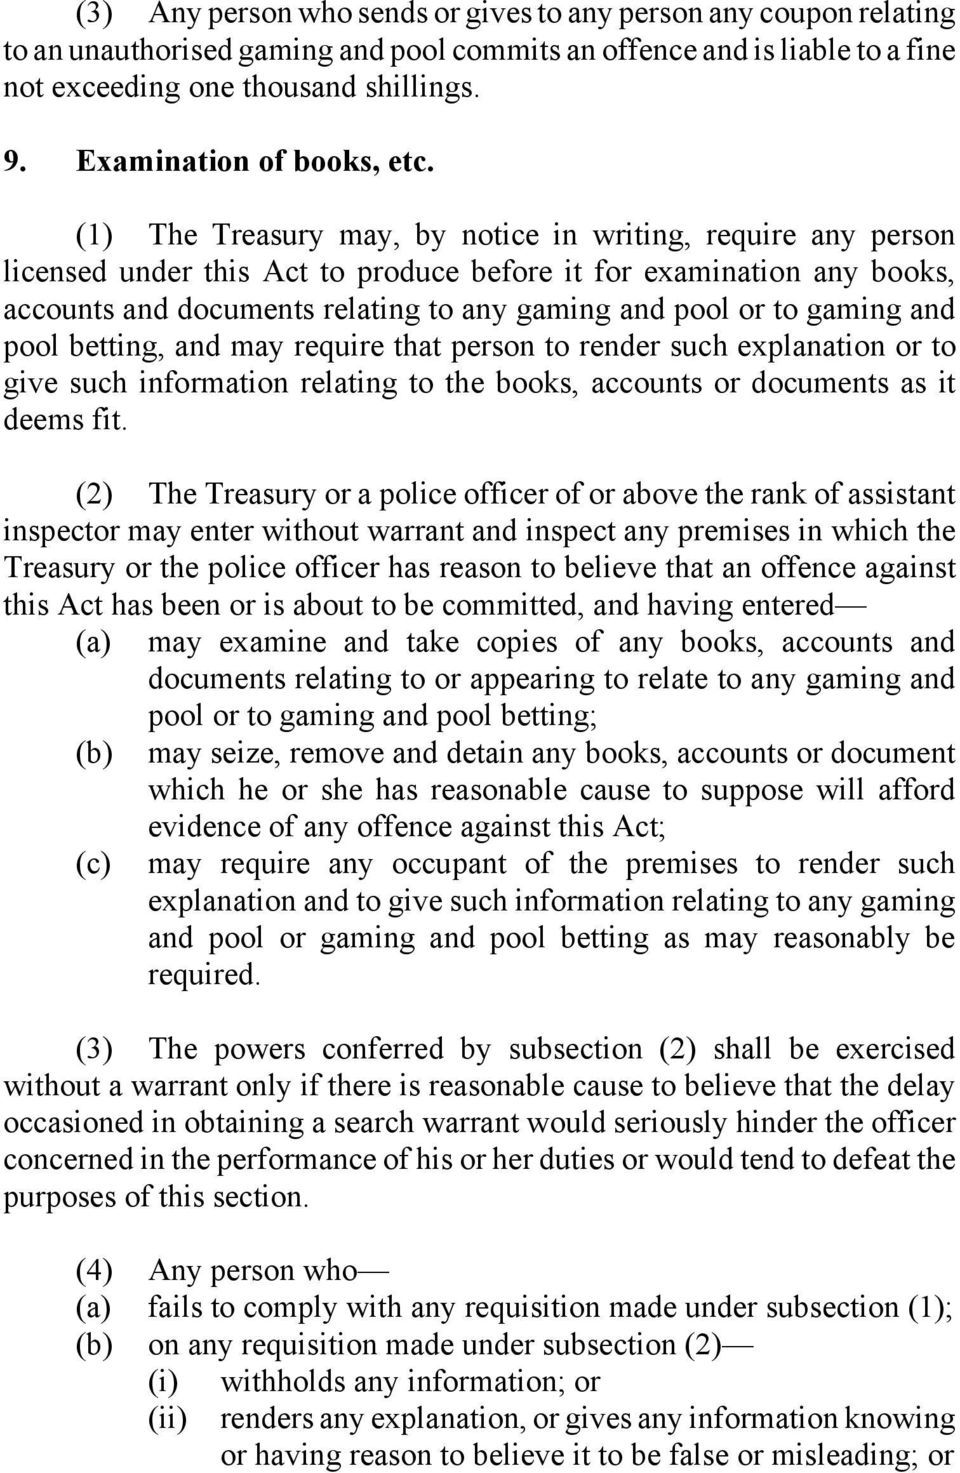 (1) The Treasury may, by notice in writing, require any person licensed under this Act to produce before it for examination any books, accounts and documents relating to any gaming and pool or to